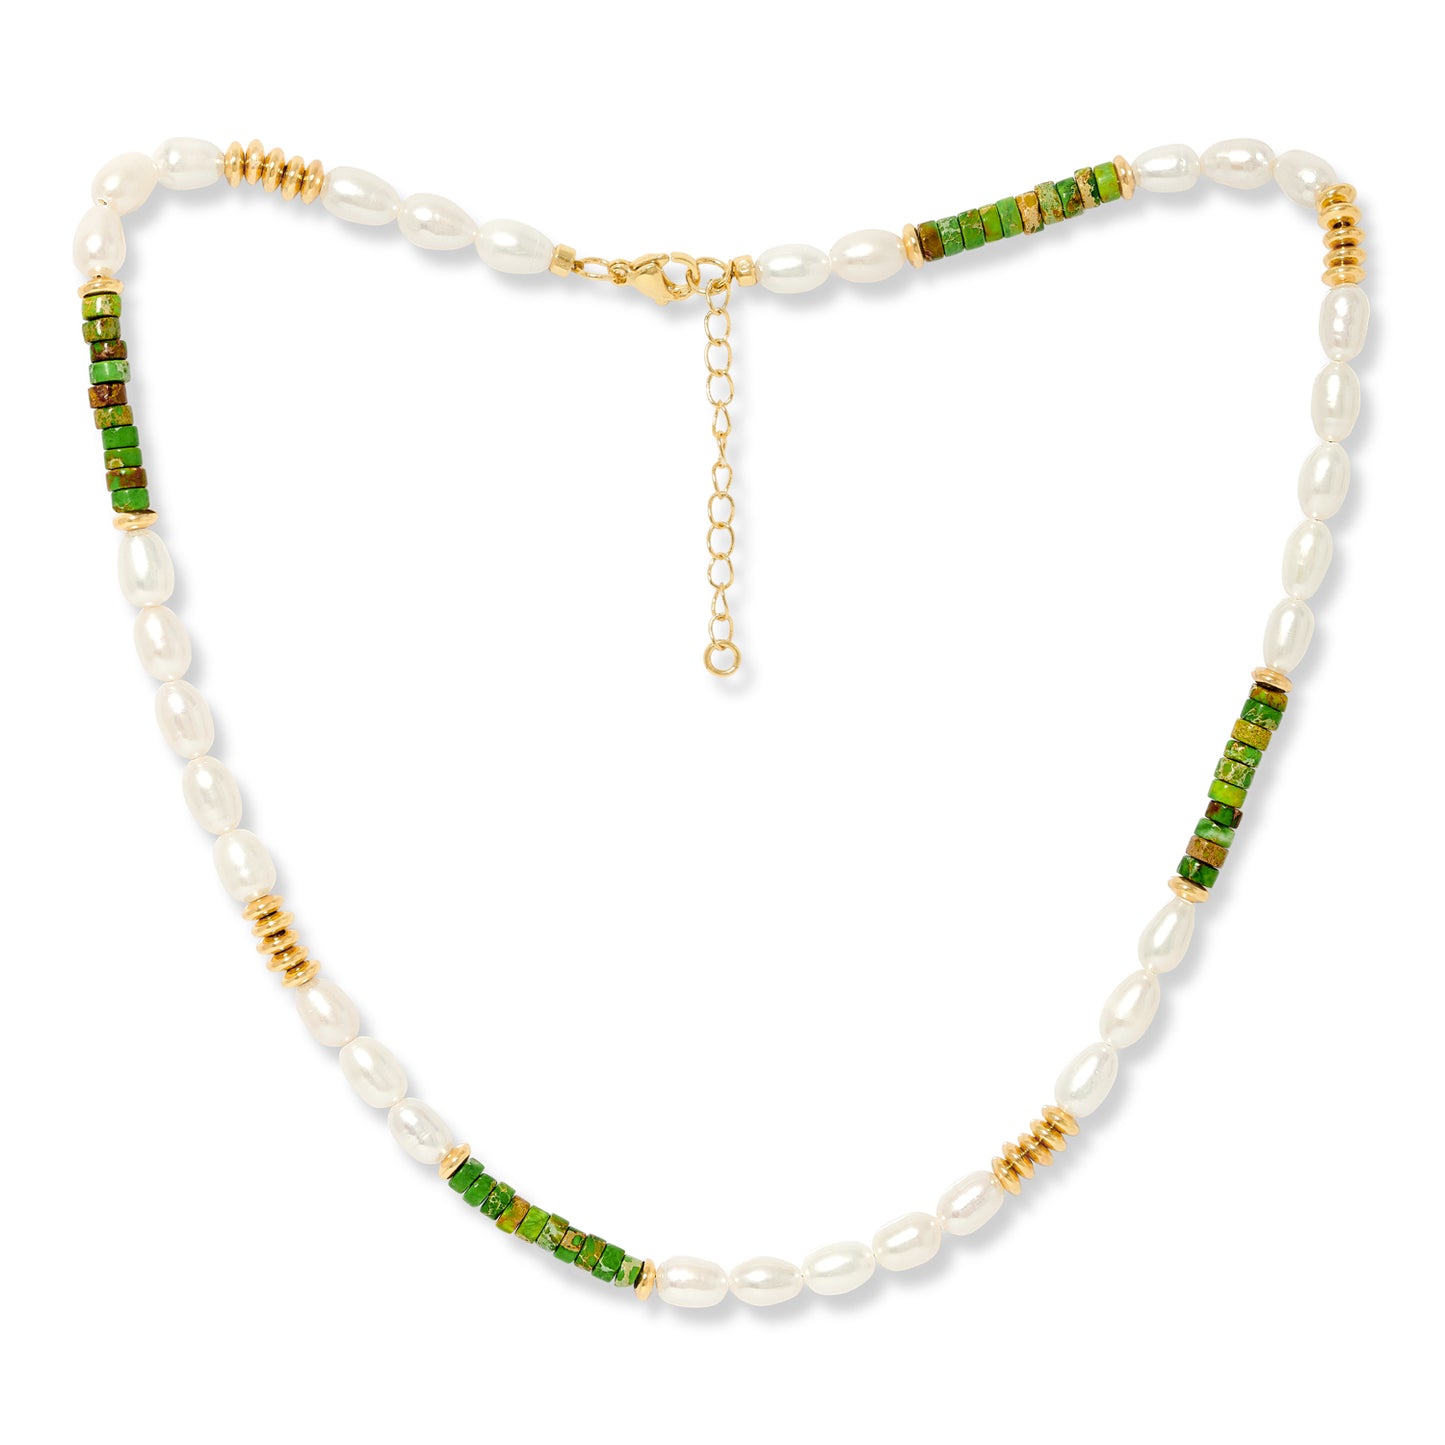 Nova oval cultured freshwater pearl necklace with green jasper & gold beads